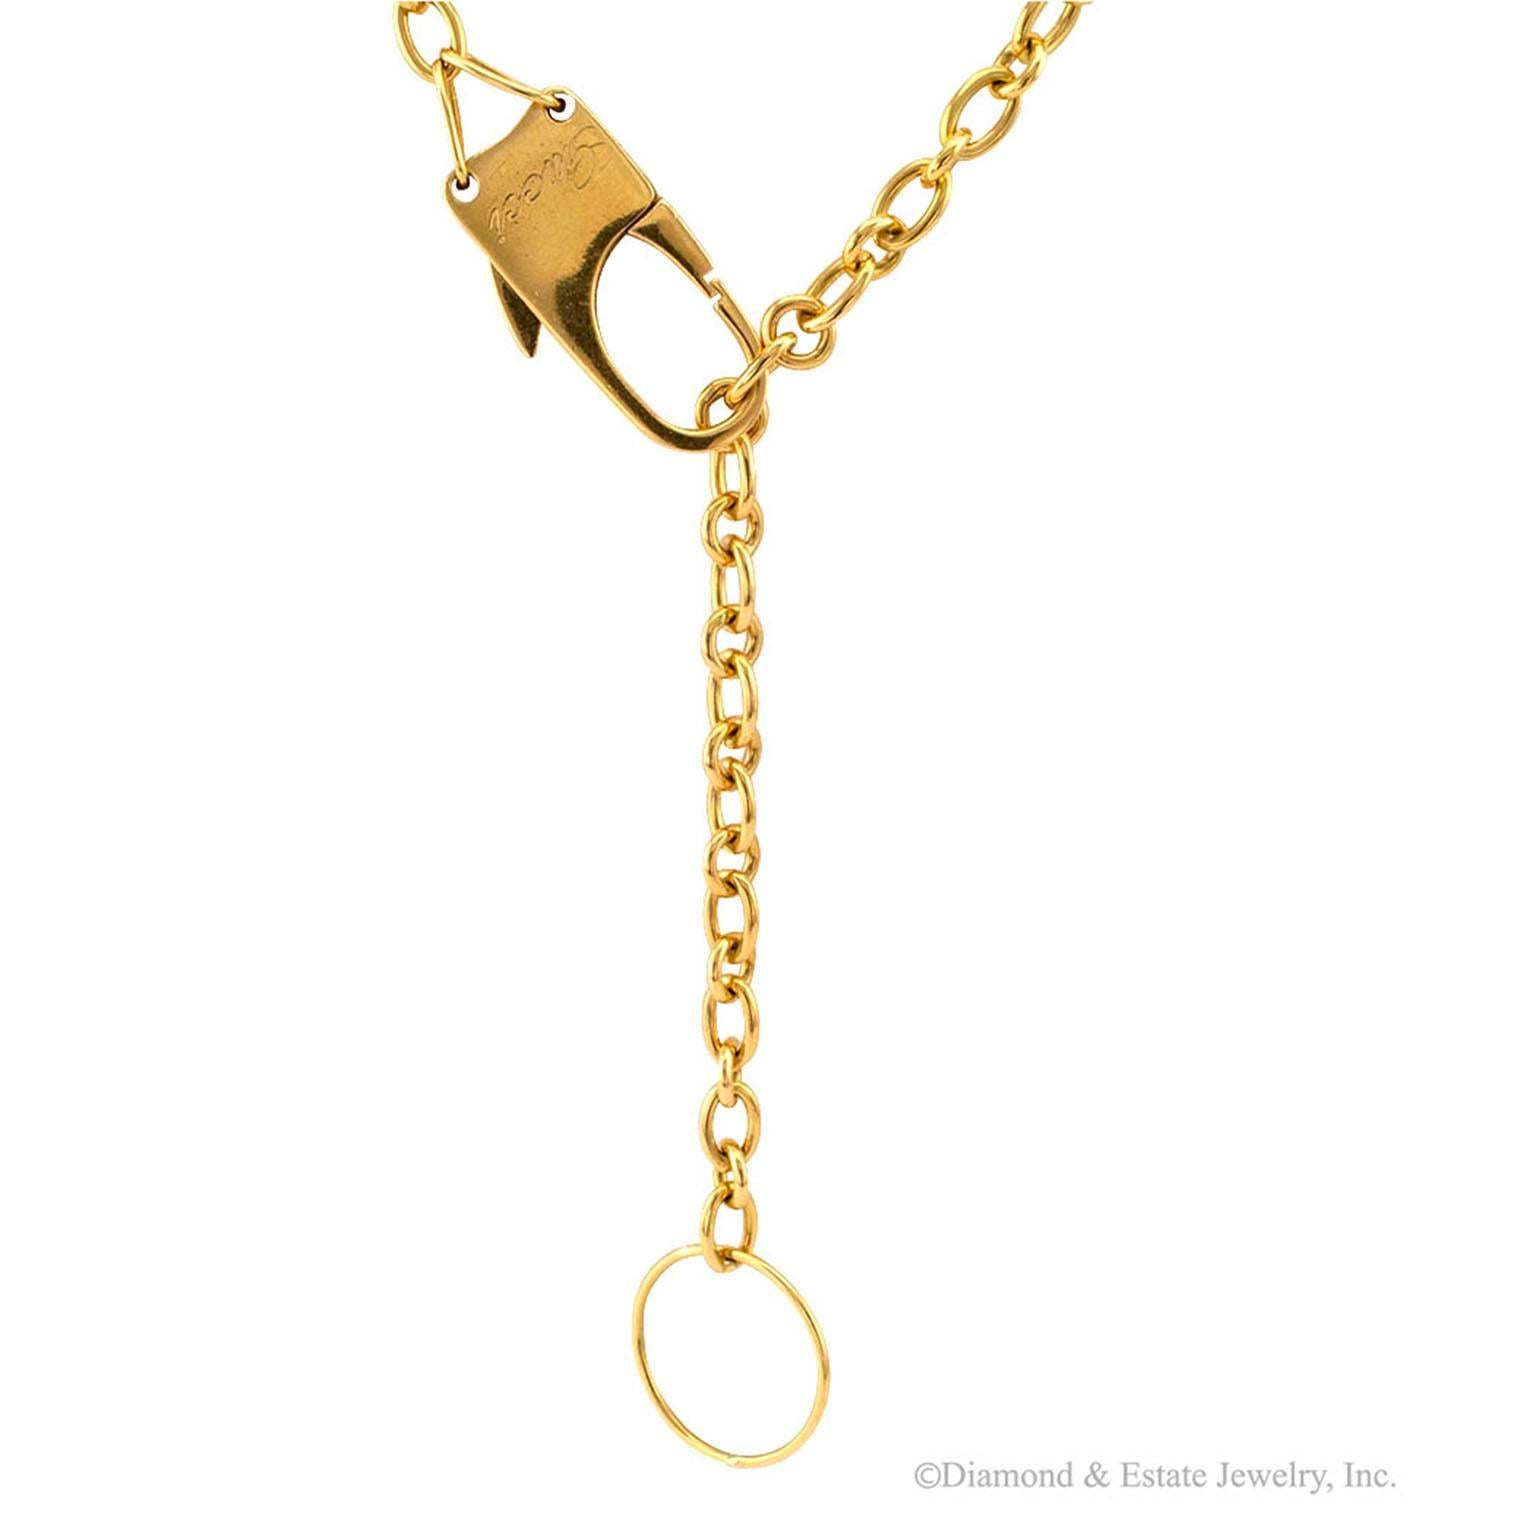 1970s Gucci Long Chain Necklace

Gucci long chain necklace with oversize lobster clasp and ring in 18-karat gold circa 1970.  The oversize lobster clasp is signed Gucci in large script and can be engaged anywhere along the necklace to alter its